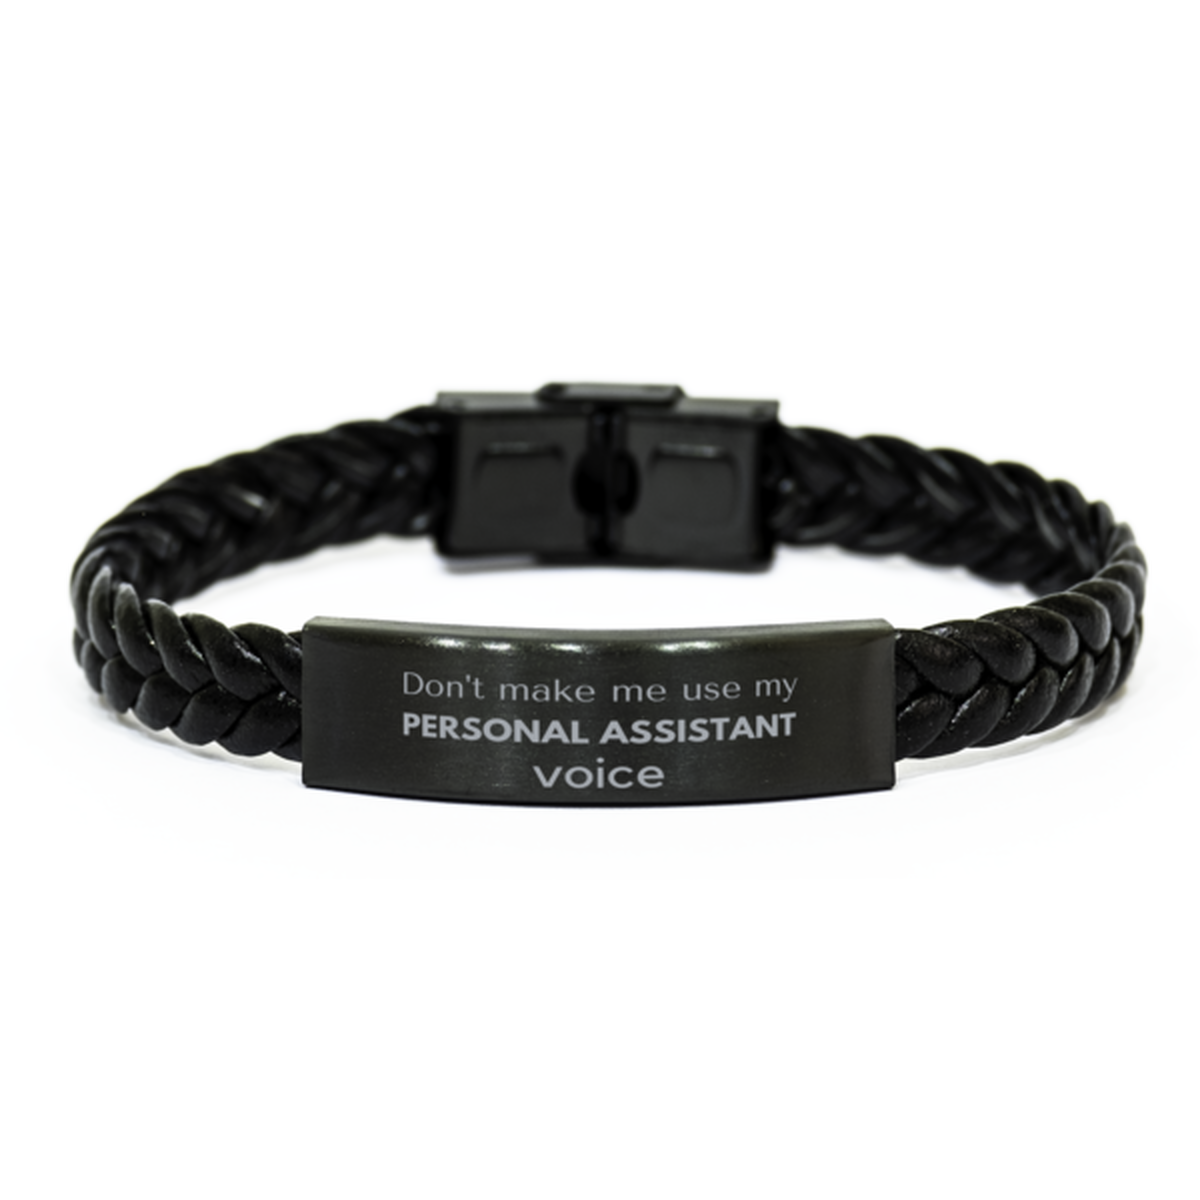 Don't make me use my Personal Assistant voice, Sarcasm Personal Assistant Gifts, Christmas Personal Assistant Braided Leather Bracelet Birthday Unique Gifts For Personal Assistant Coworkers, Men, Women, Colleague, Friends